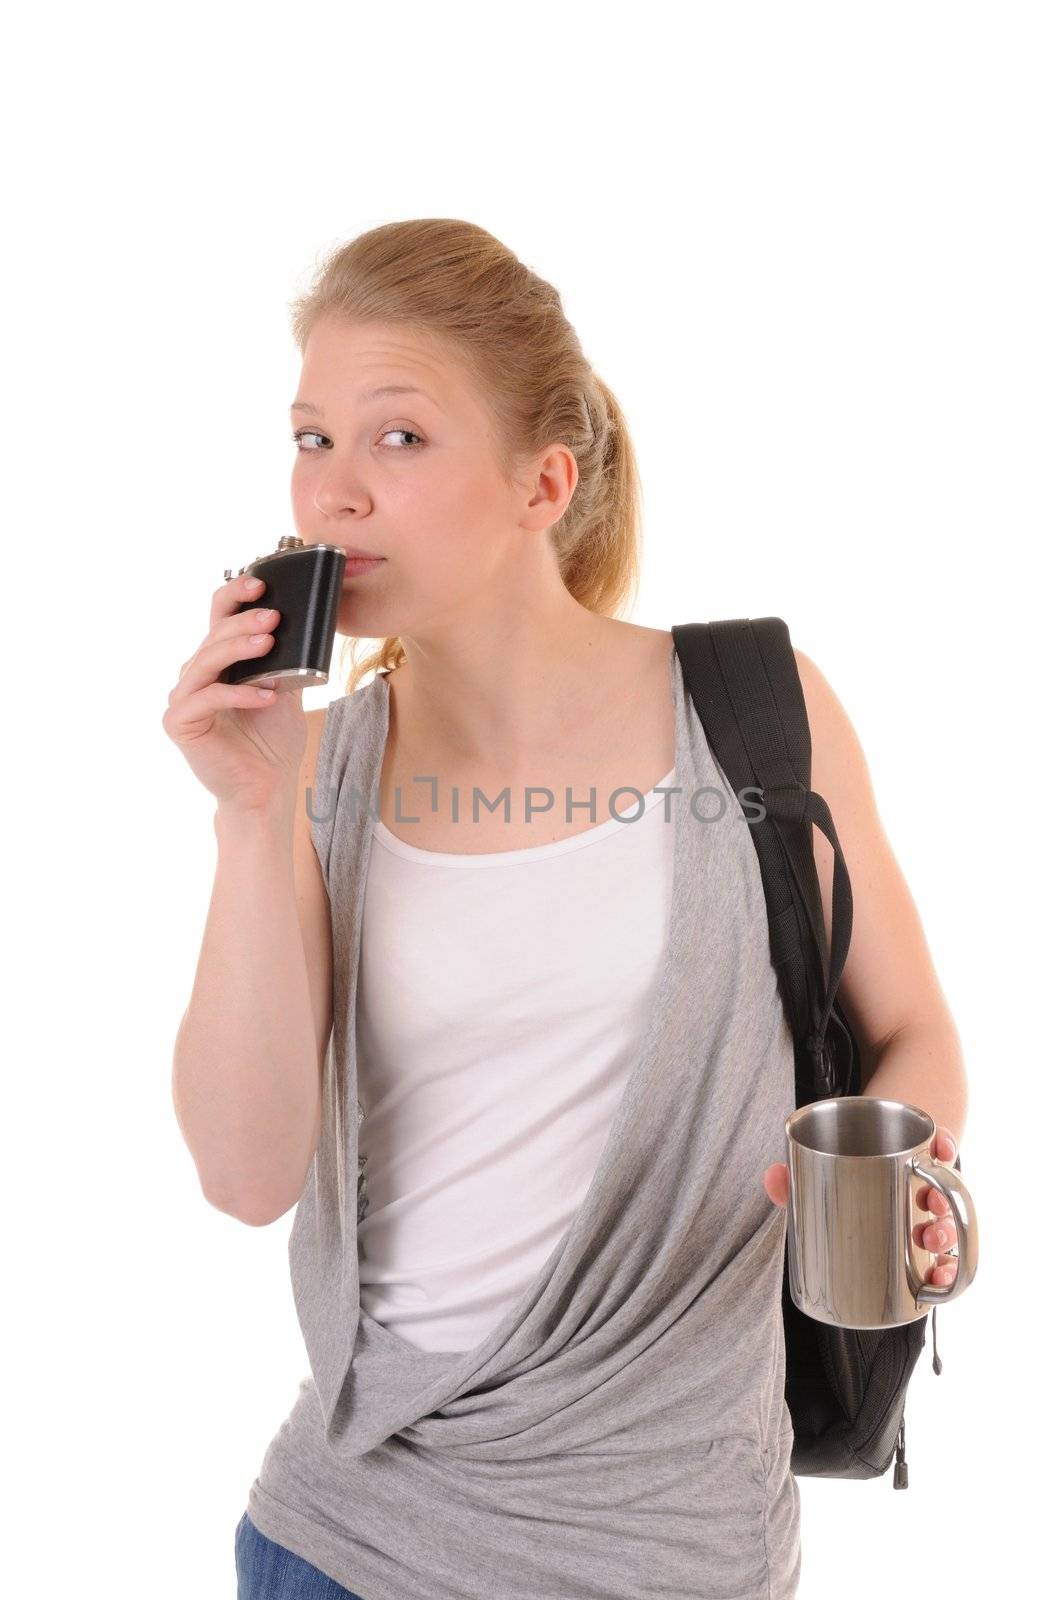 Beauty girl with metal cup and rucksack is testing smell of drink in a flask. Isolated on white background.